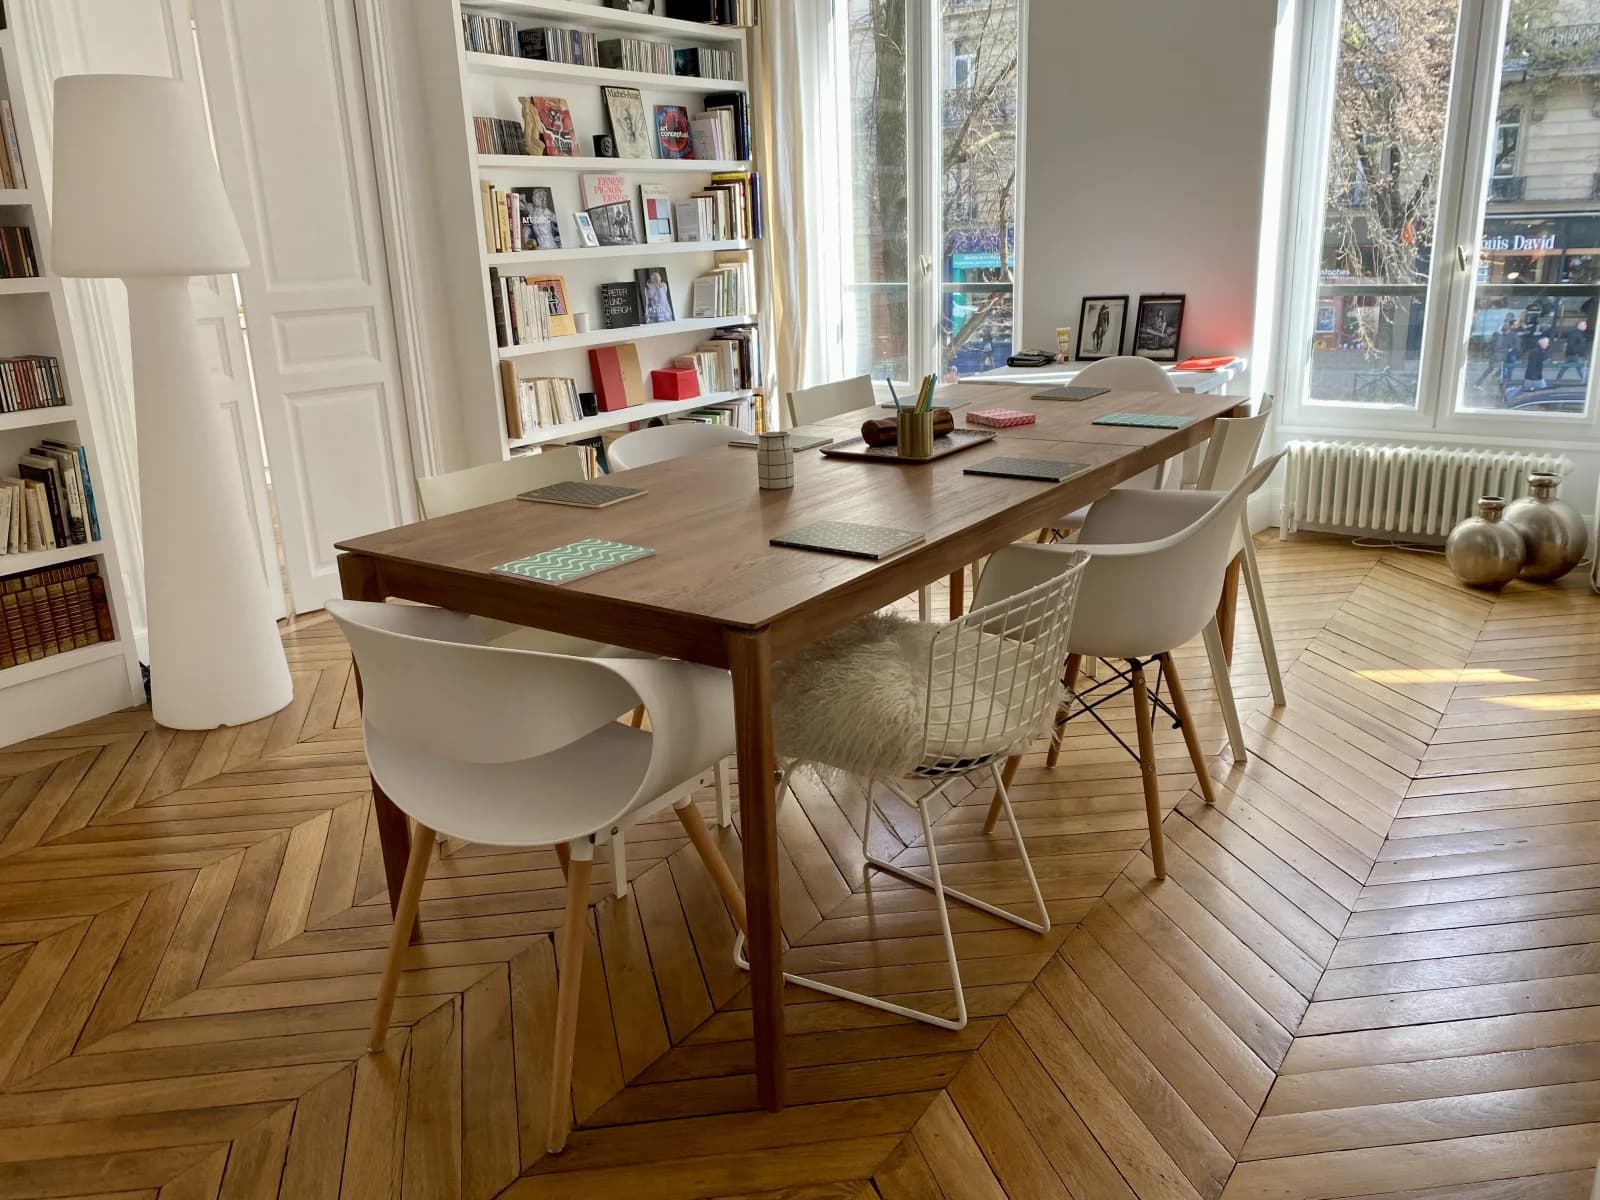 Space Beautiful, bright and warm contemporary Haussmann style - 1